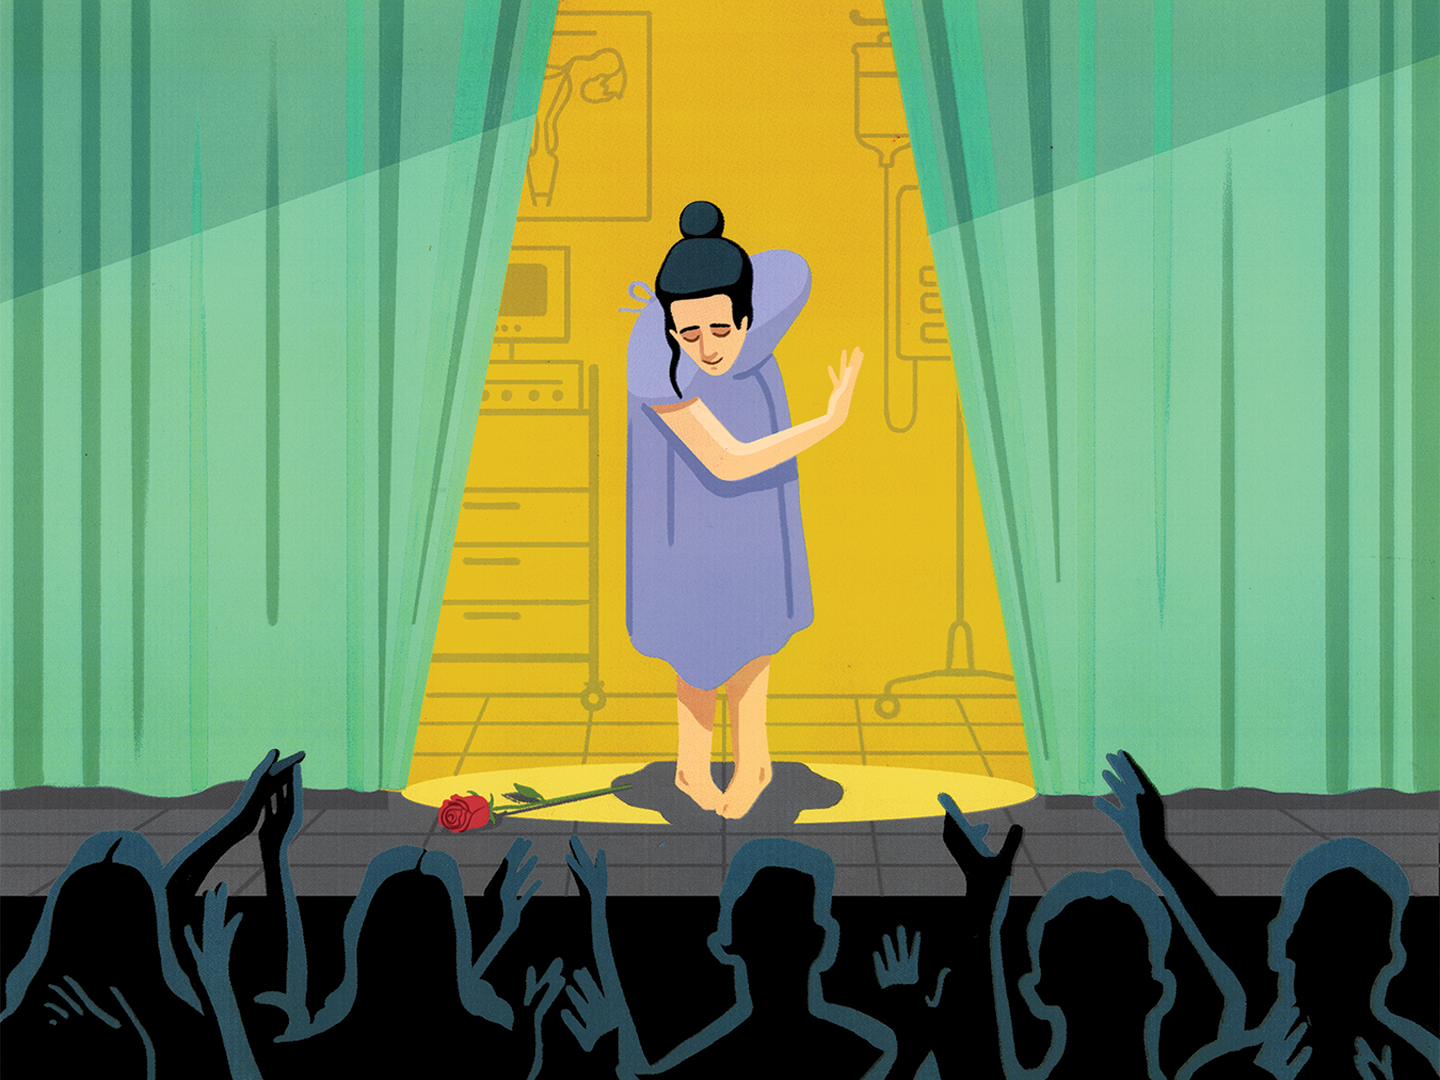 Illustration of woman bowing on a stage with the curtains pulled back to reveal a doctor's office. The woman is also in a hospital gown.